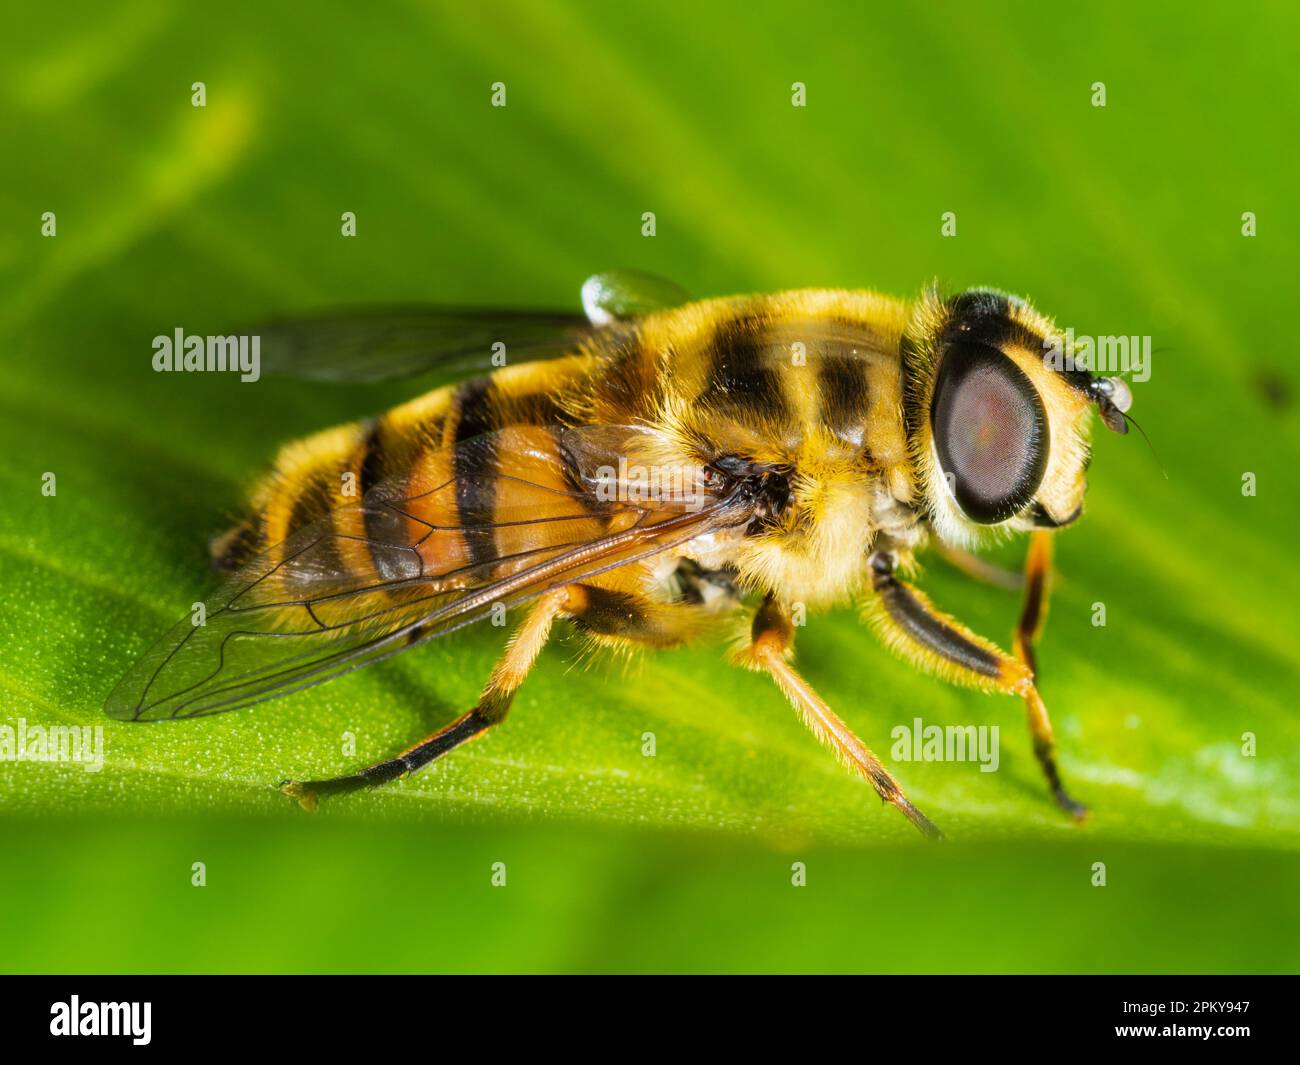 Adult female hoverfly, Myathropa florea, a UK native and garden visitor Stock Photo